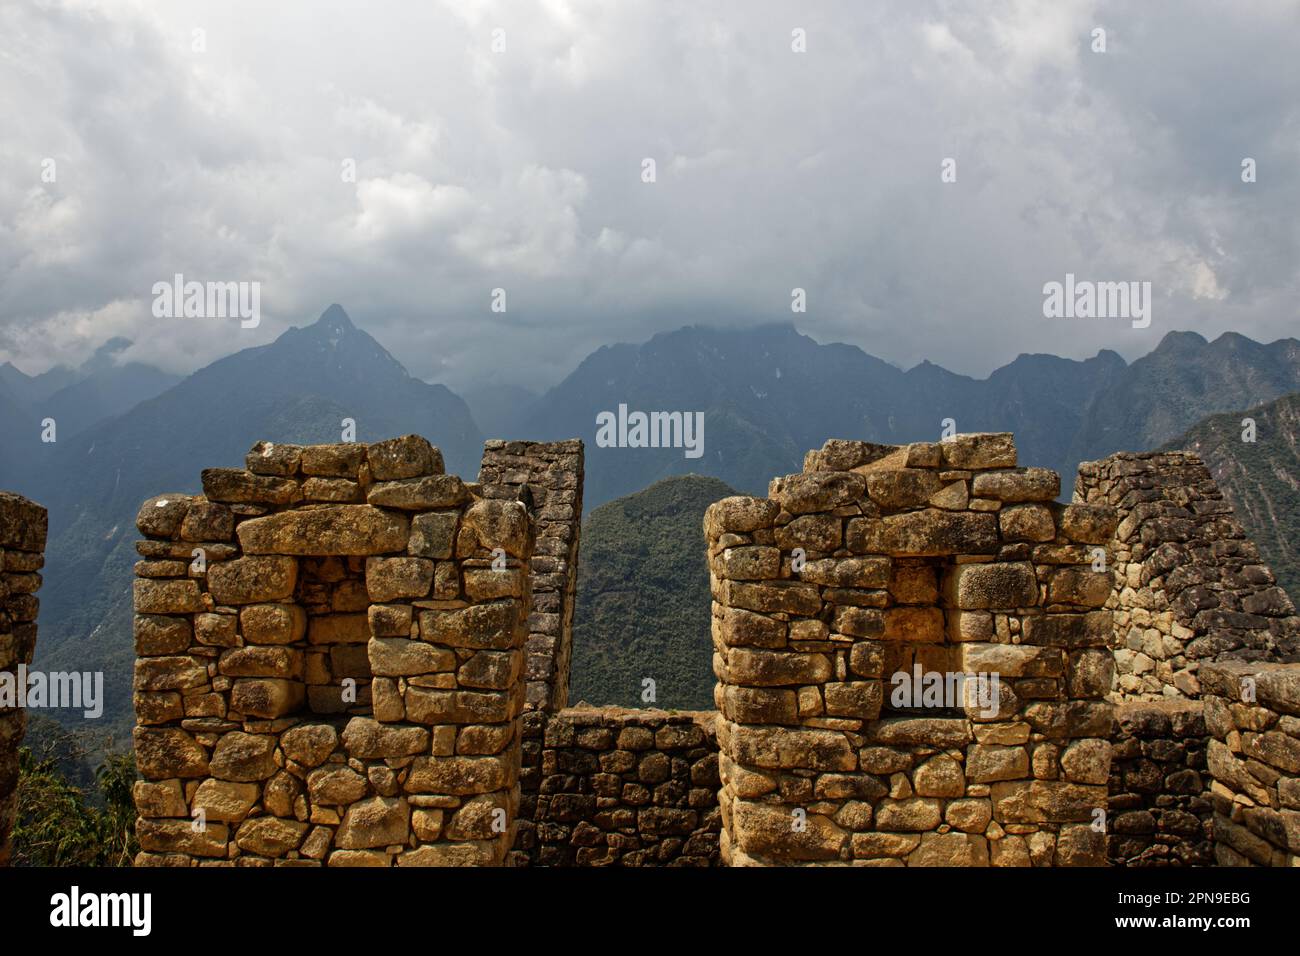 The view of the neighboring mountains from Machu Picchu, Cusco Department, Peru Stock Photo